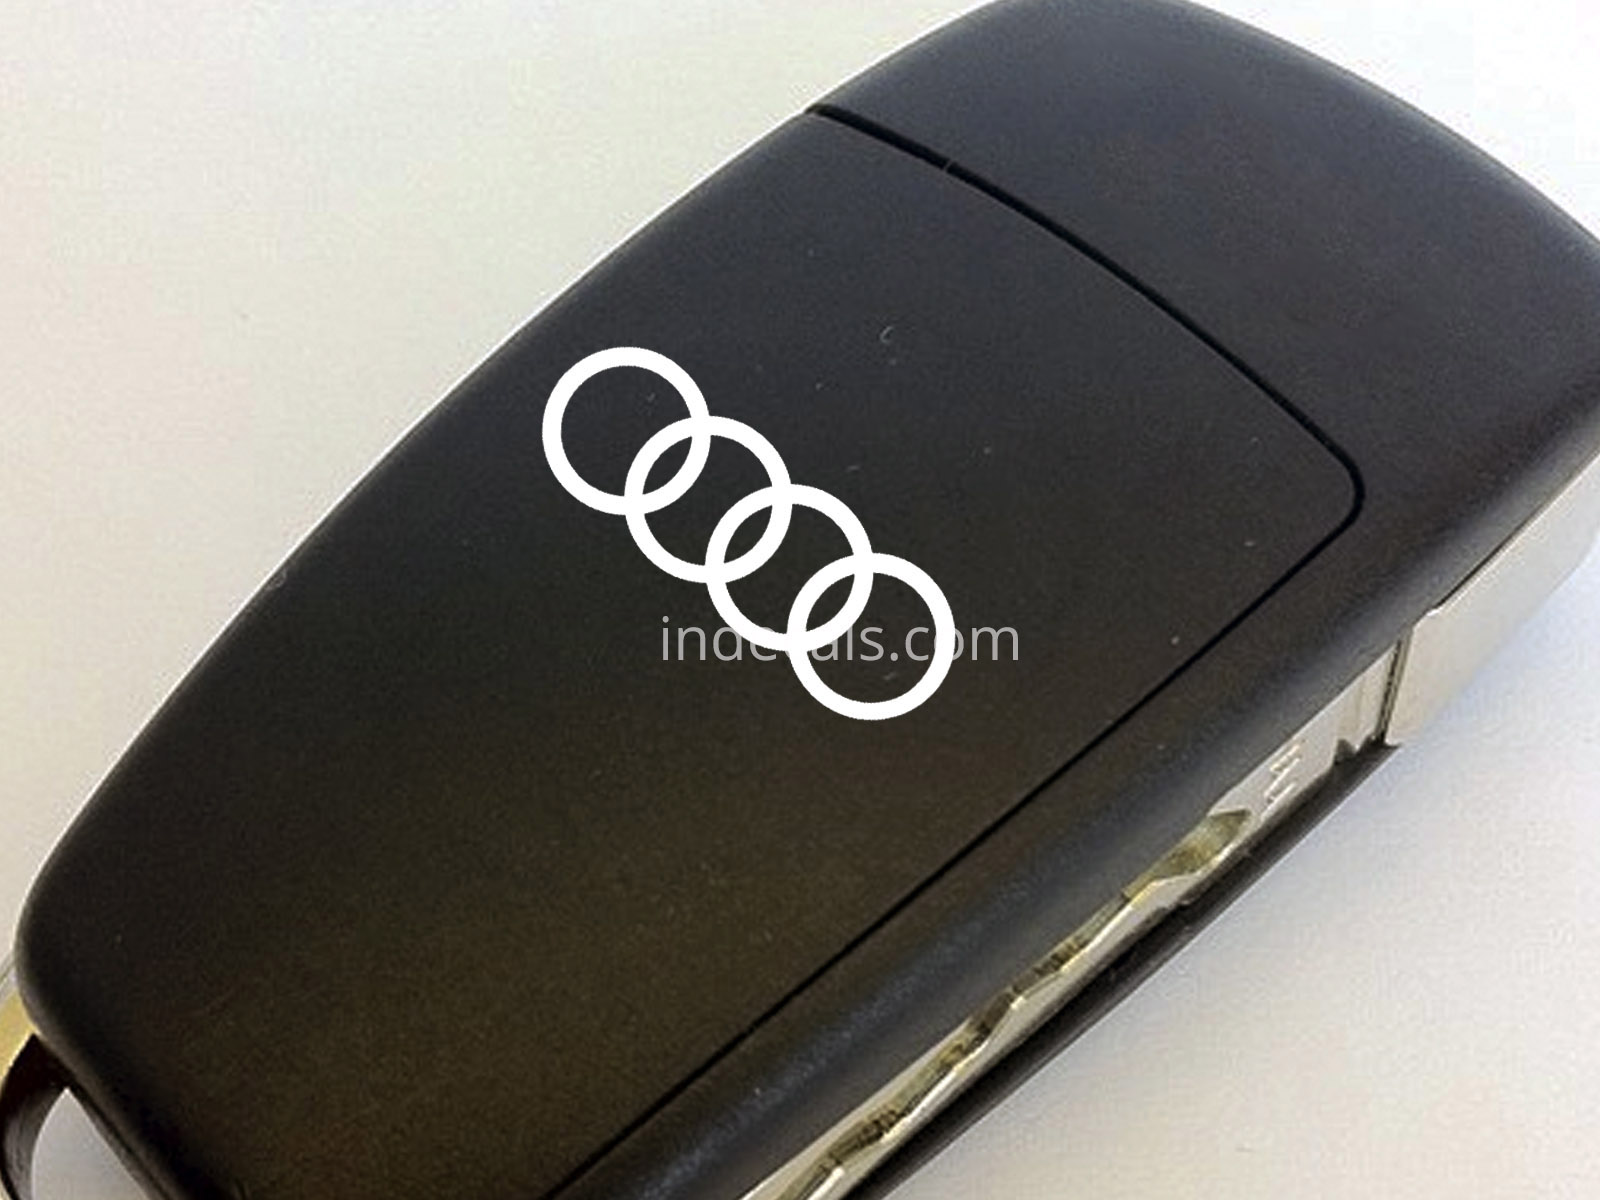 3 x Audi Rings Stickers for Key - White